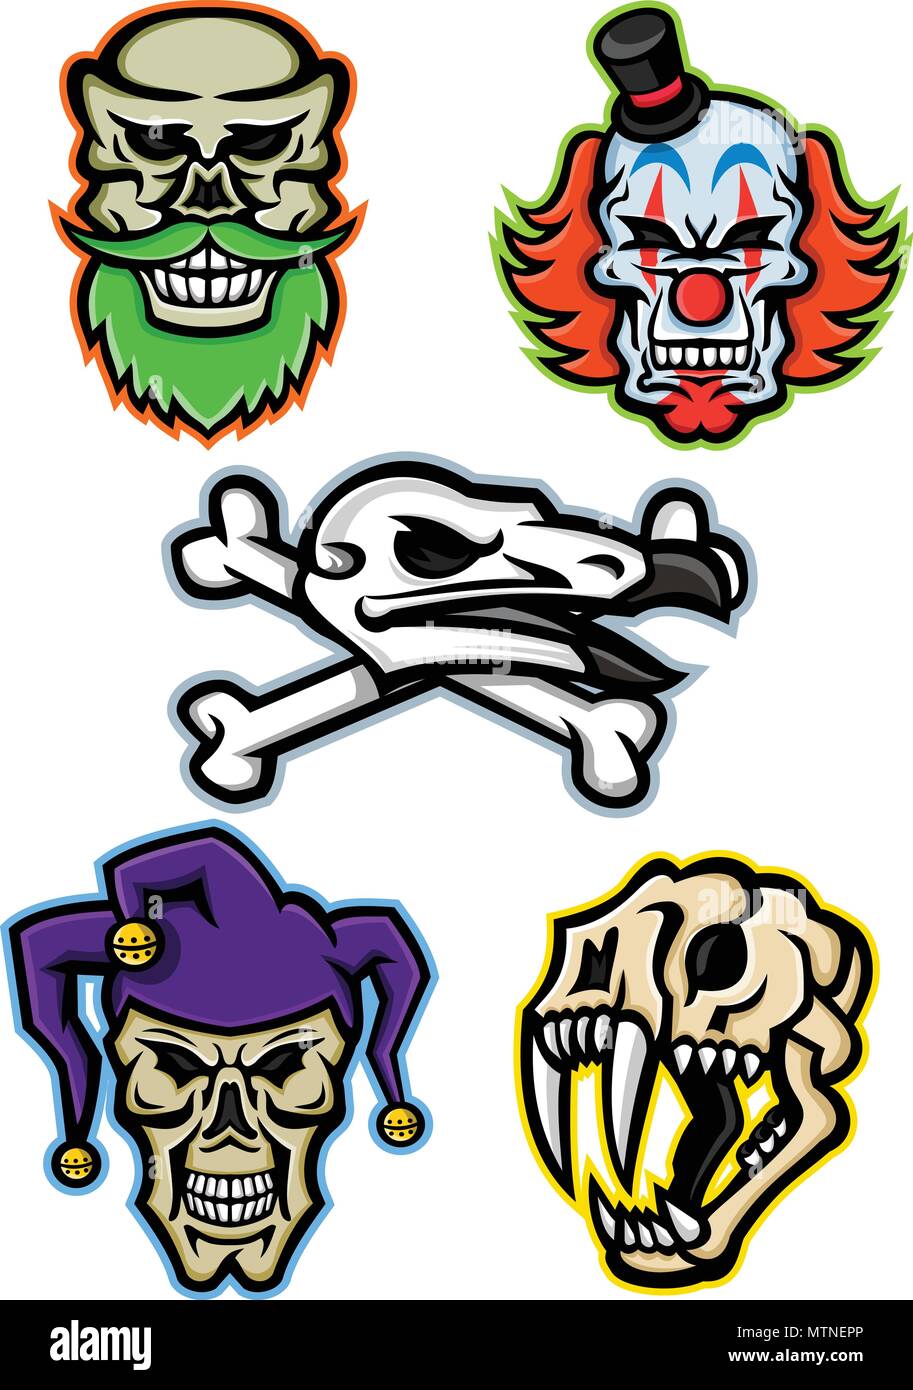 Mascot icon illustration set of skull heads and bones of a bearded hipster skull, whiteface clown skull, vulture or condor with crossed bones, court j Stock Vector